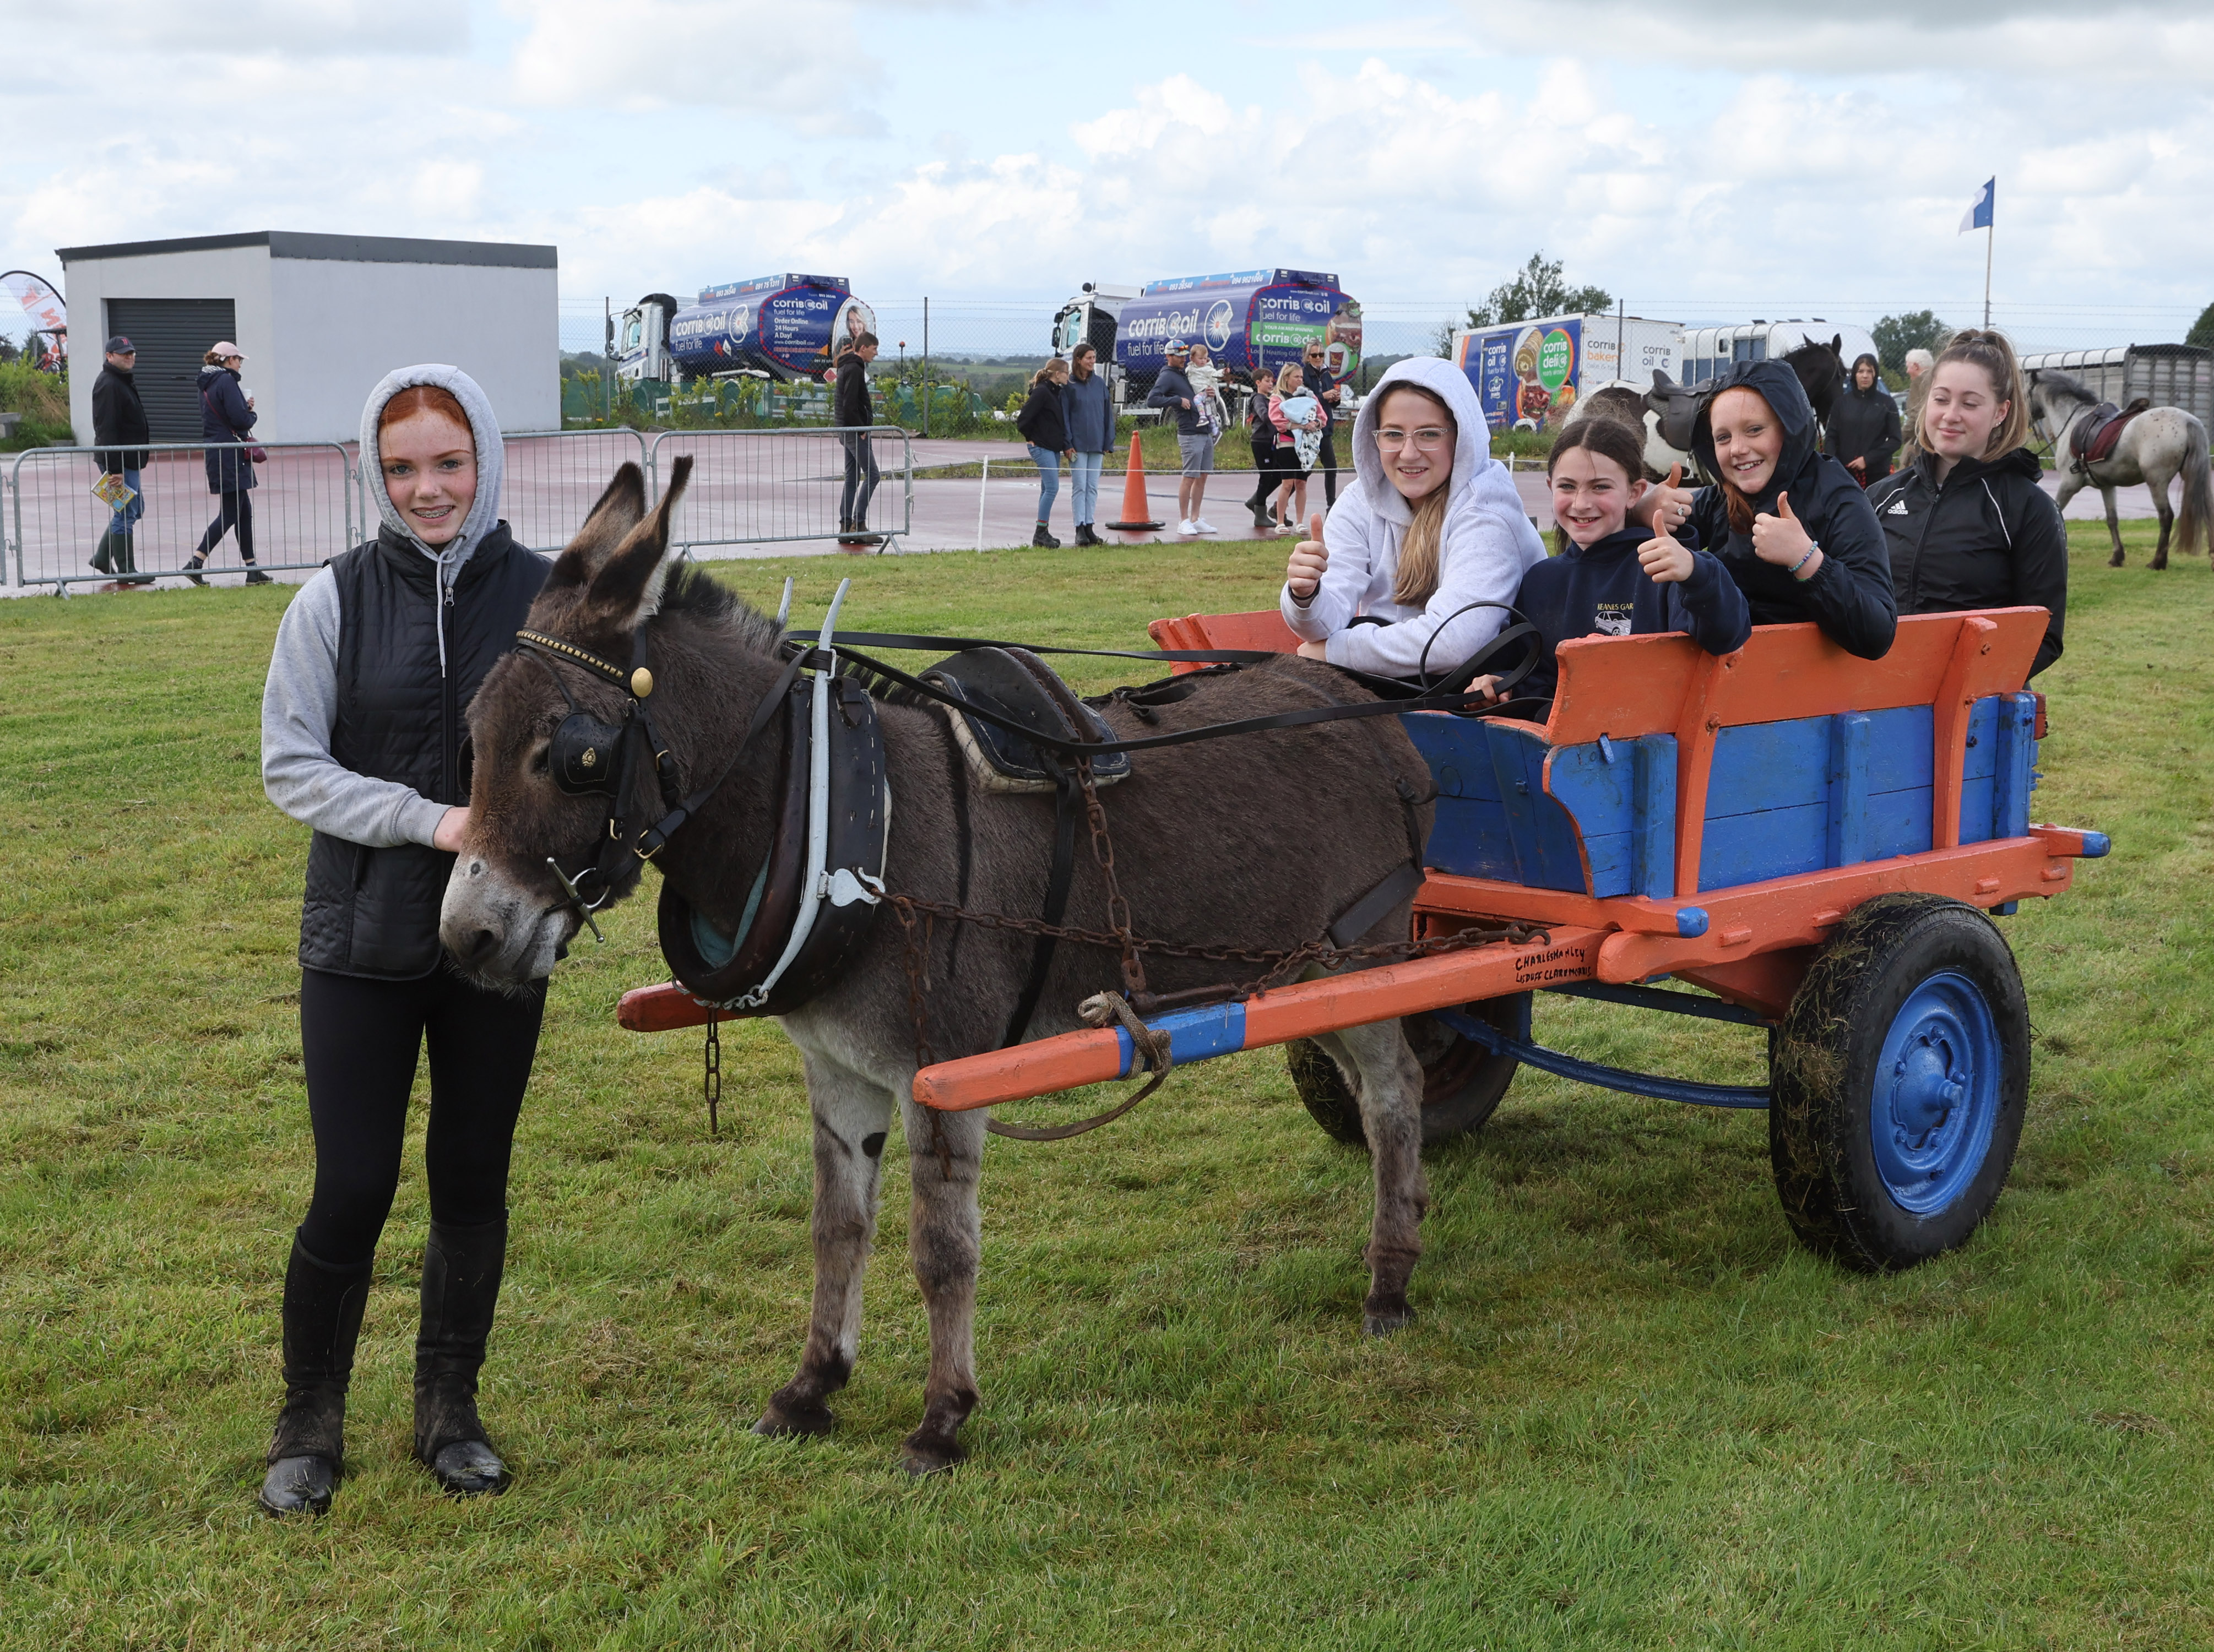 Enjoying the "Spin" in the donkey cart at the Claremorris 103rd Show in Claremorris on 5th August. Photo © Michael Donnelly